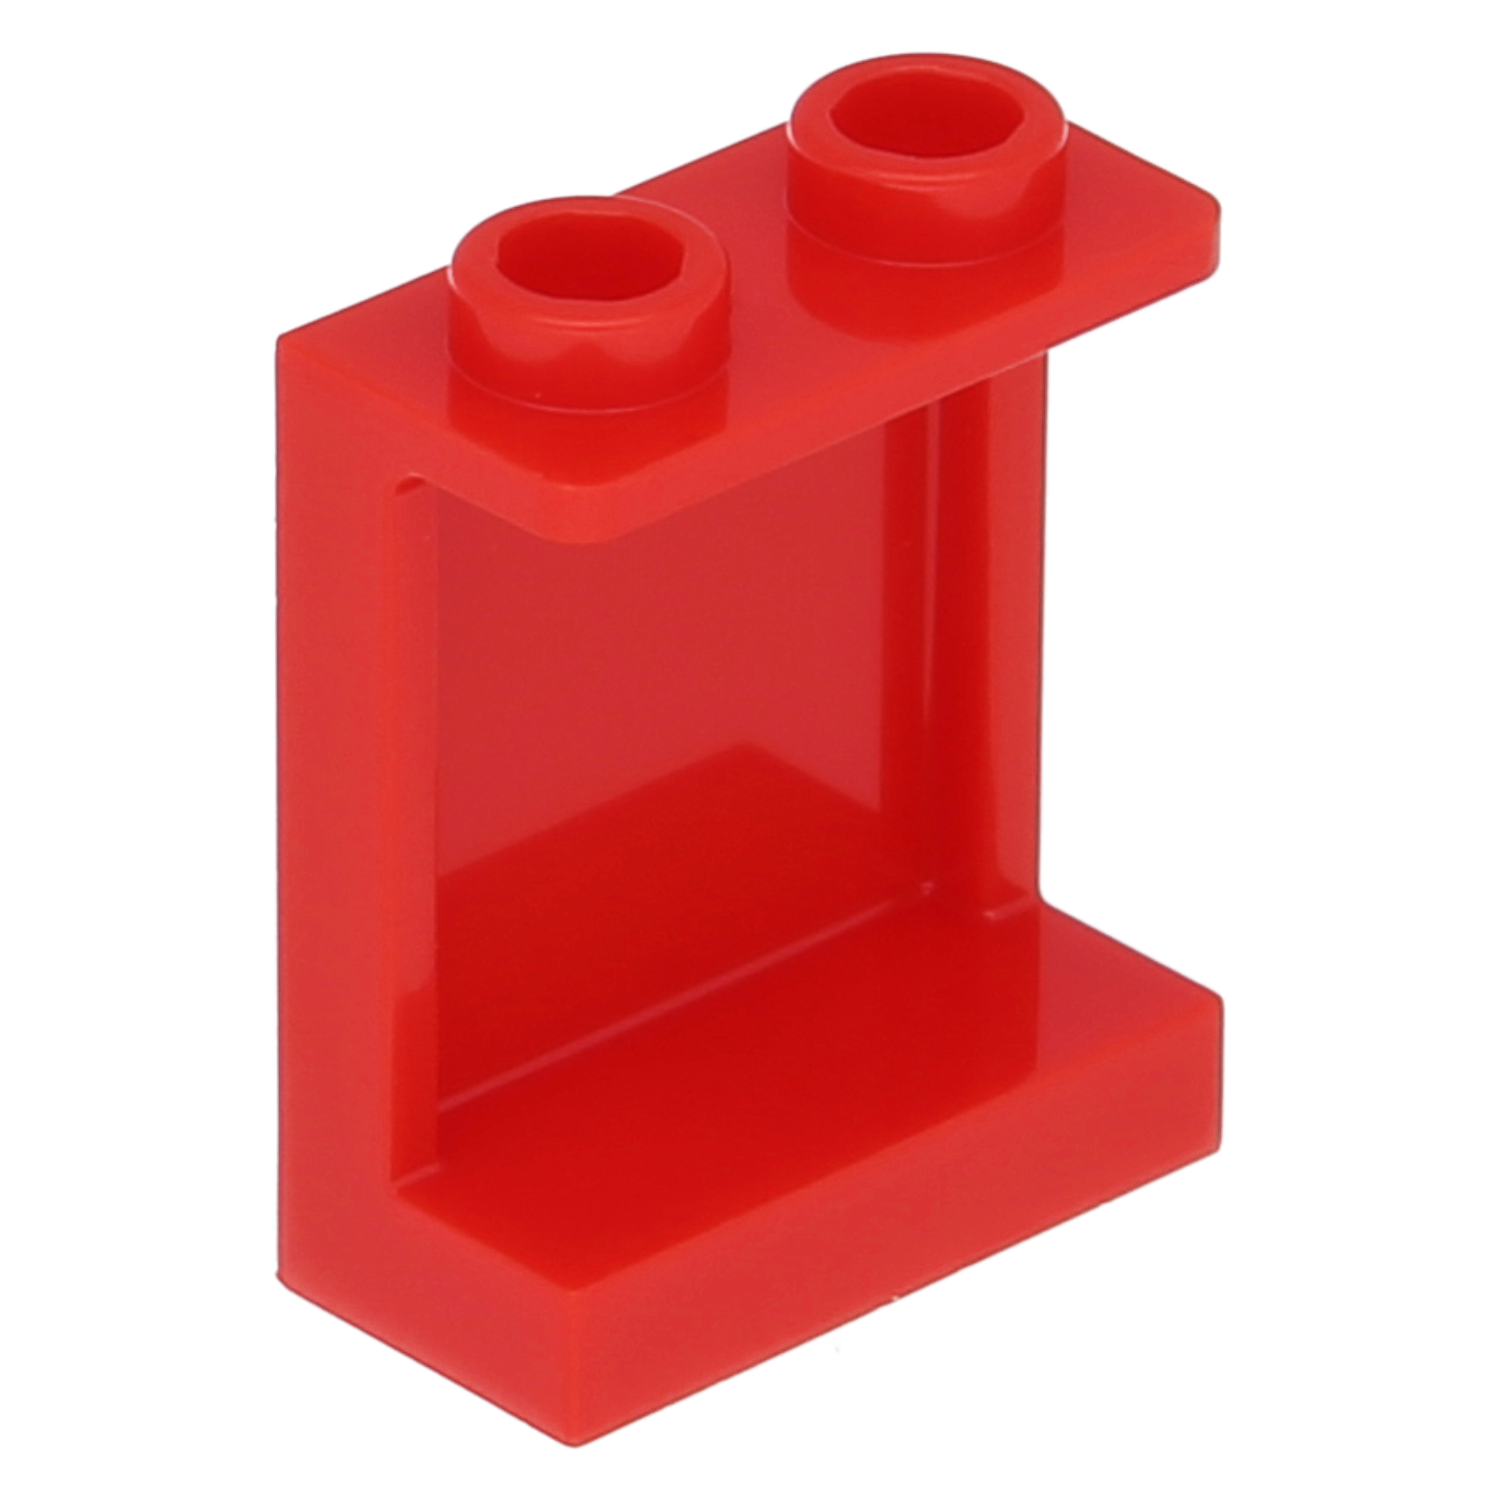 LEGO PANELE - 1 x 2 x 2 with side support (hollow knobs)